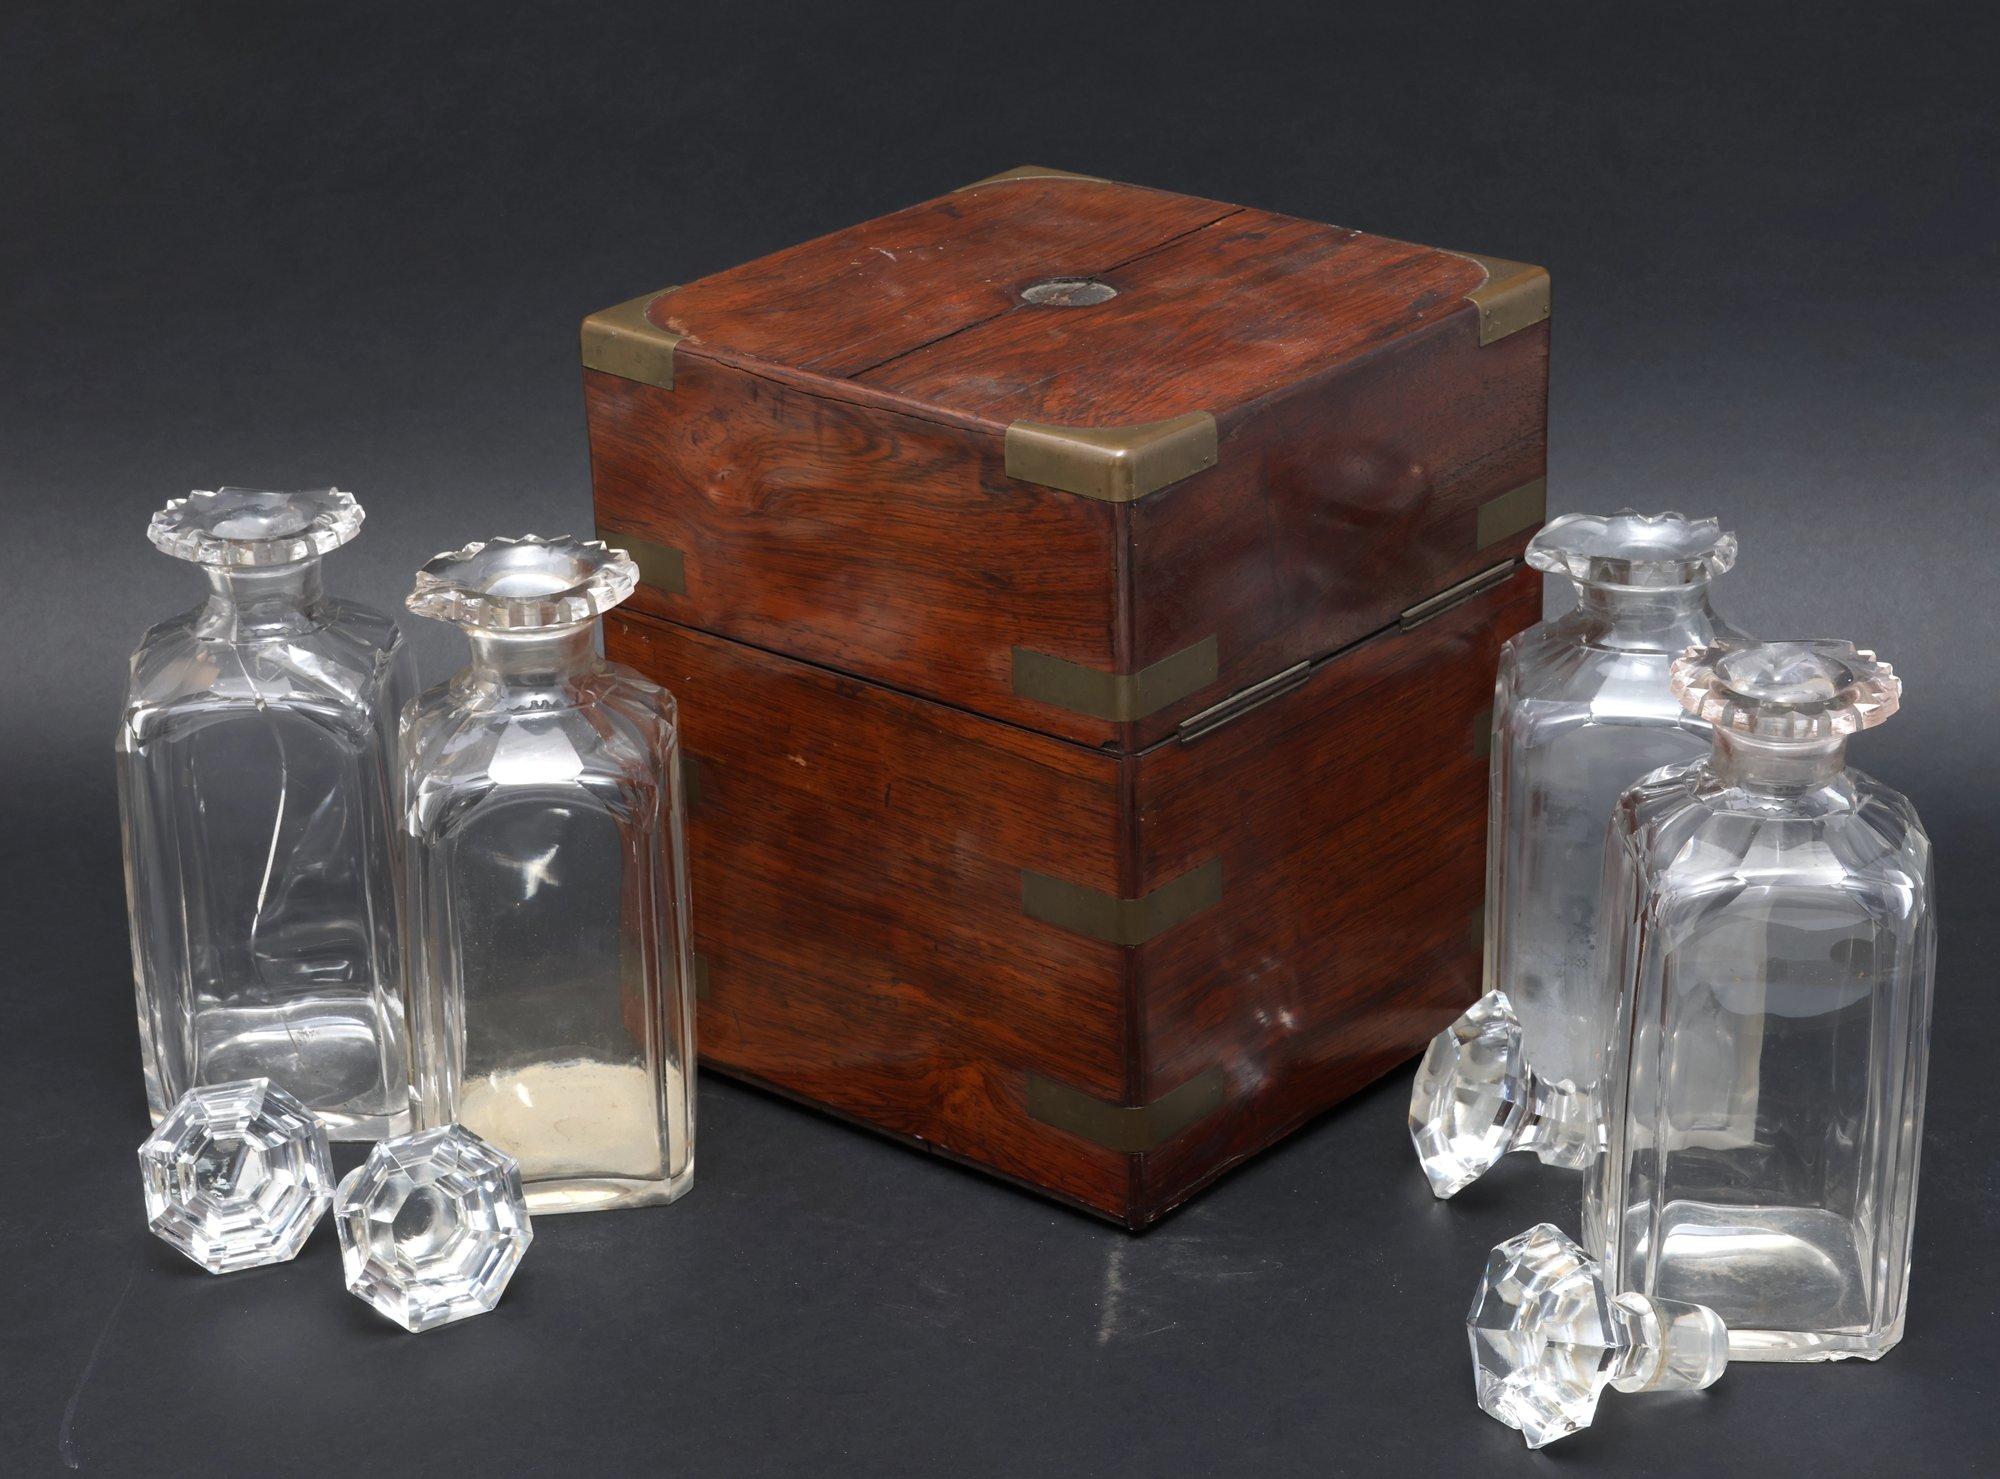 Wooden Case With Decanters Inside